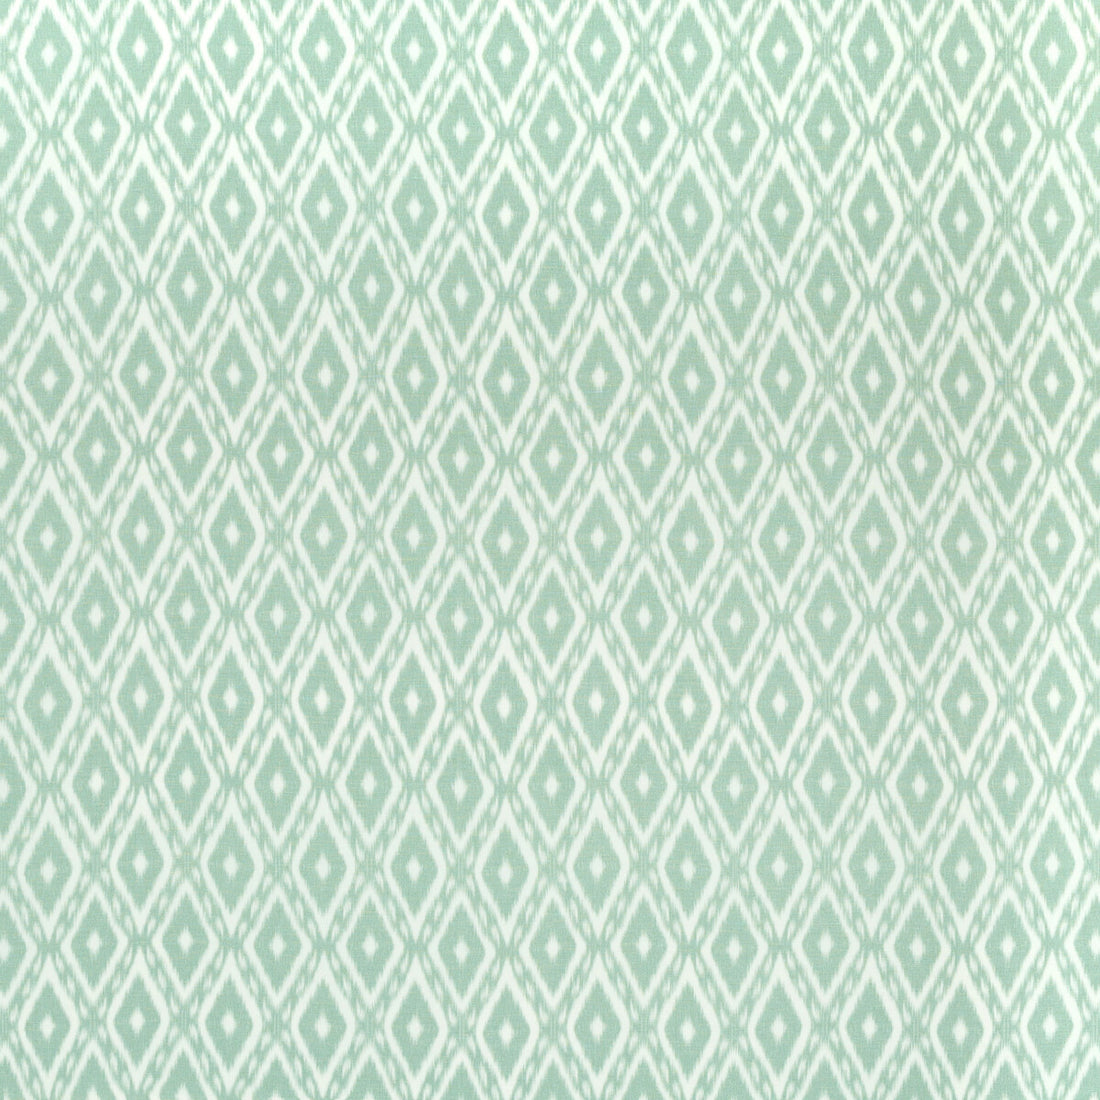 Bartow Print fabric in jade color - pattern 2020182.23.0 - by Lee Jofa in the Avondale collection